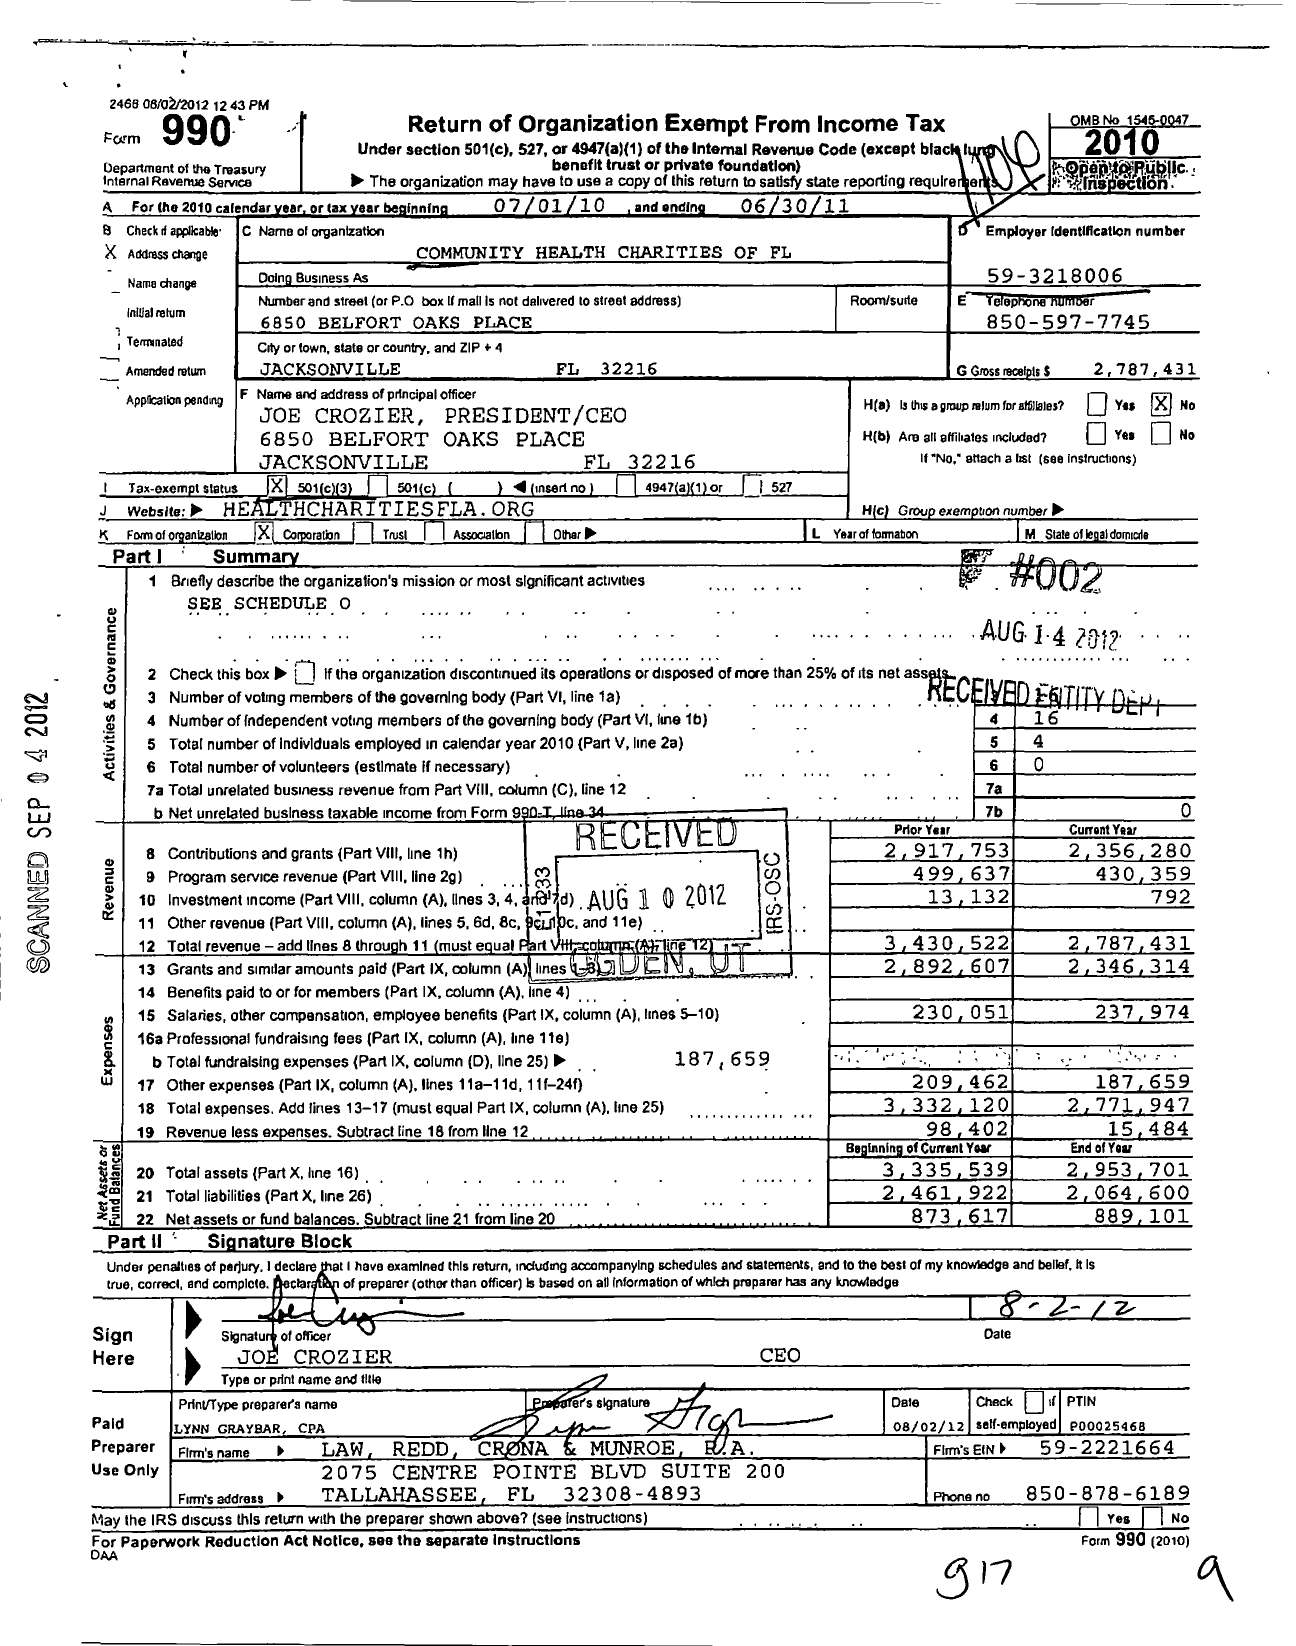 Image of first page of 2010 Form 990 for Community Health Charities of Florida